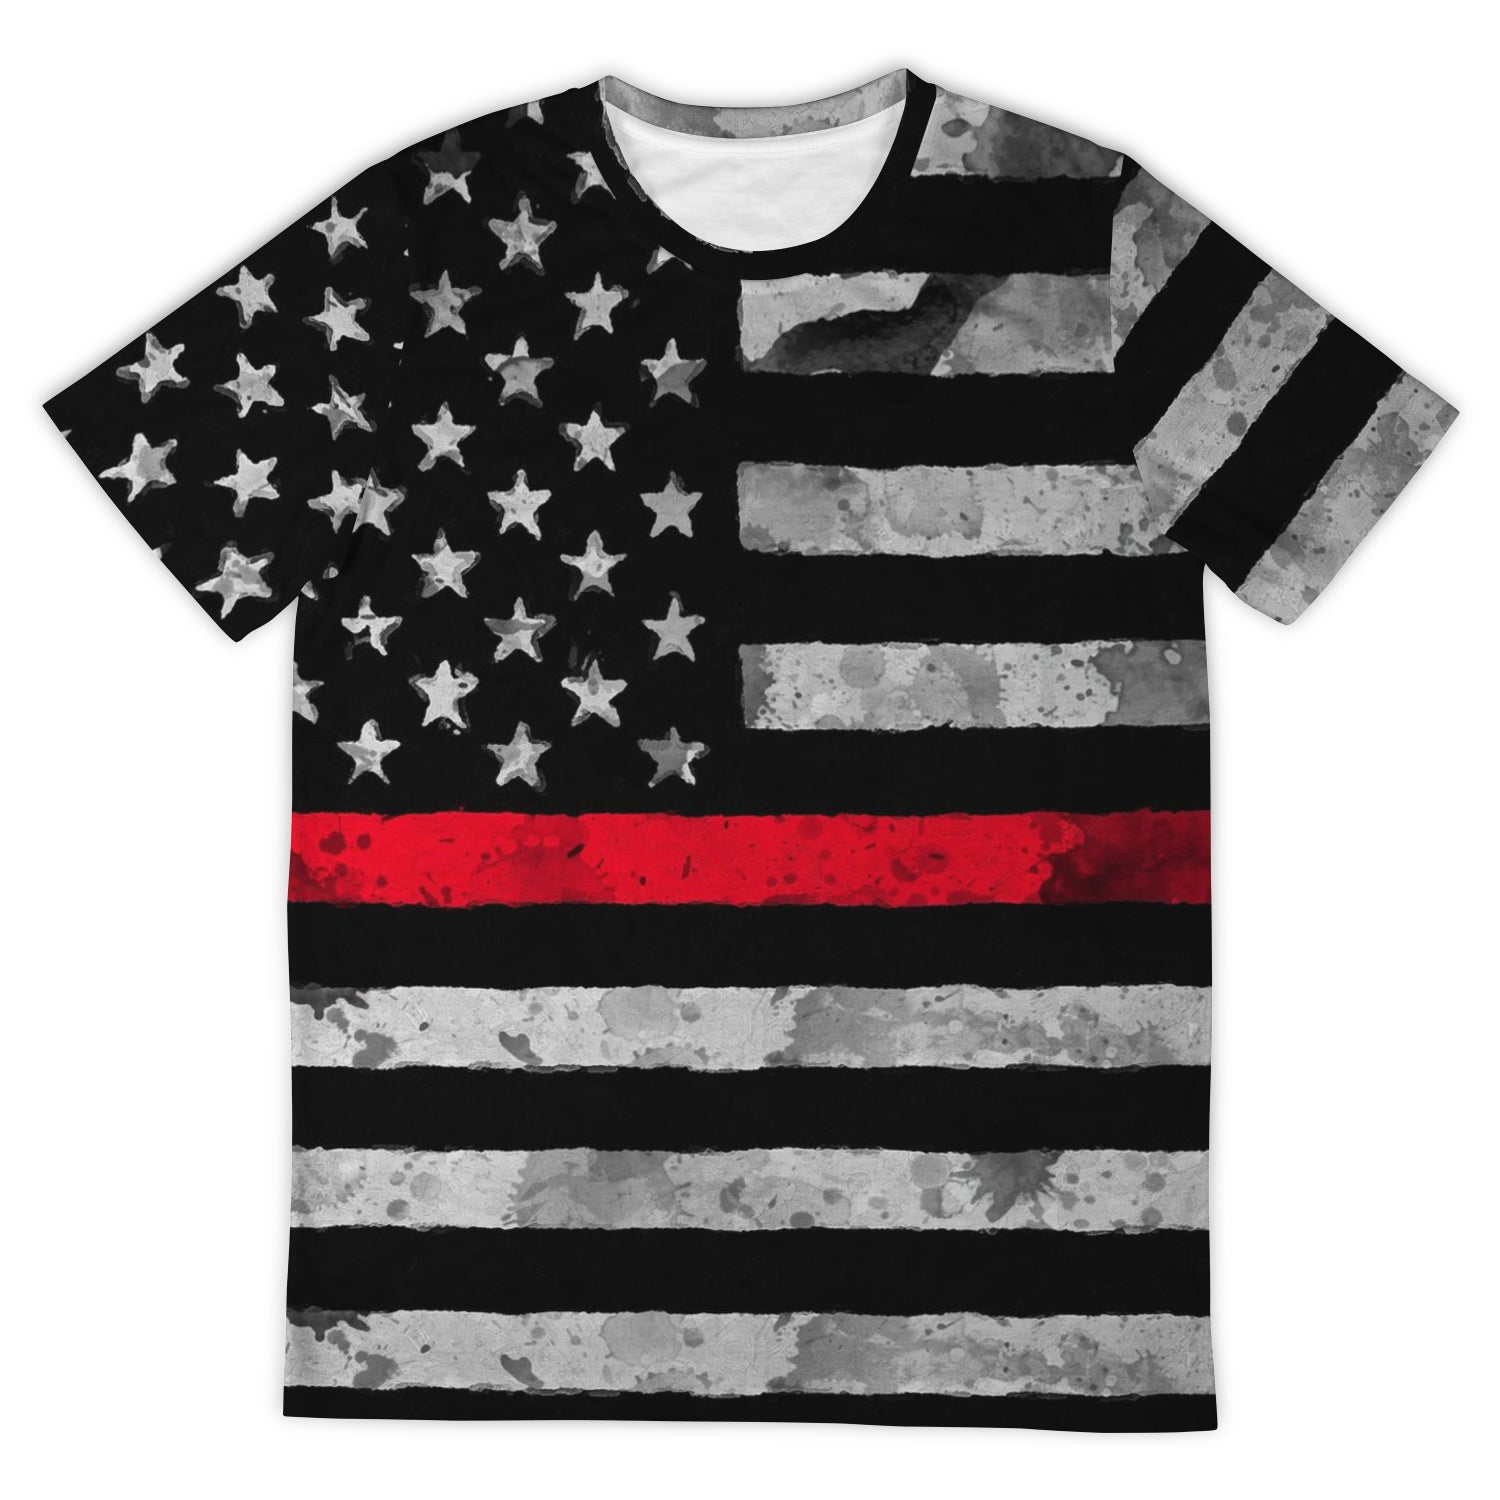 Then Red Line All Over Print Shirt